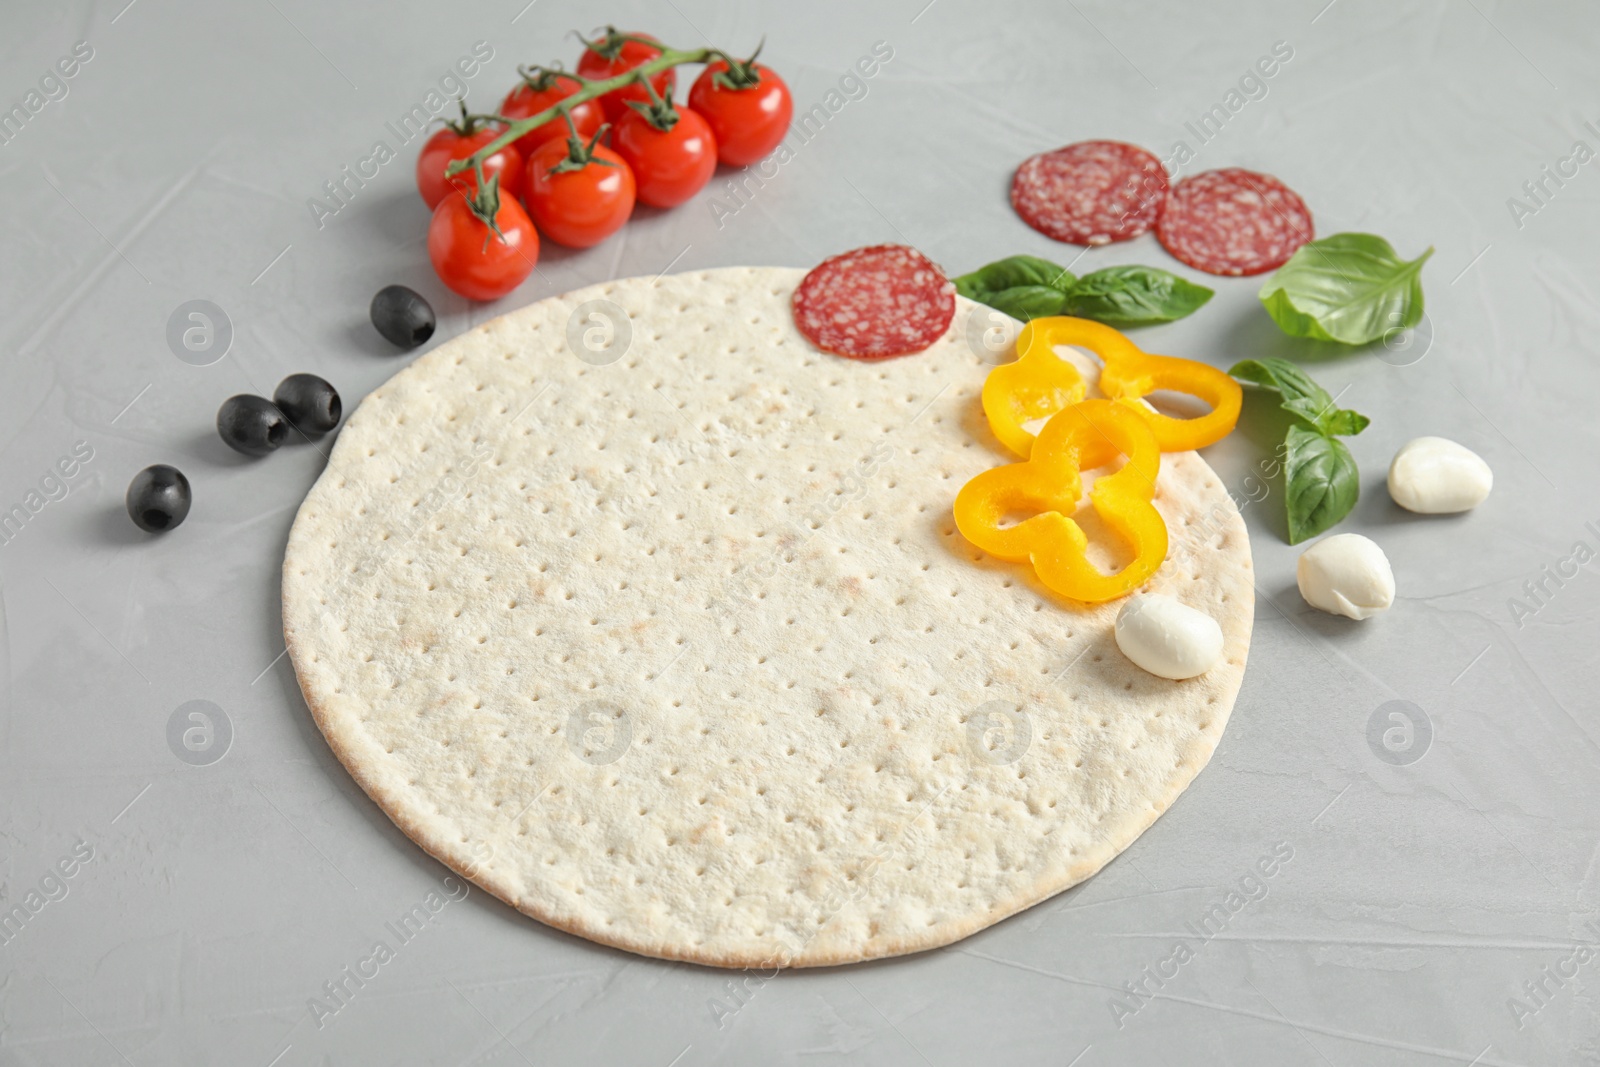 Photo of Base and ingredients for pizza on light table